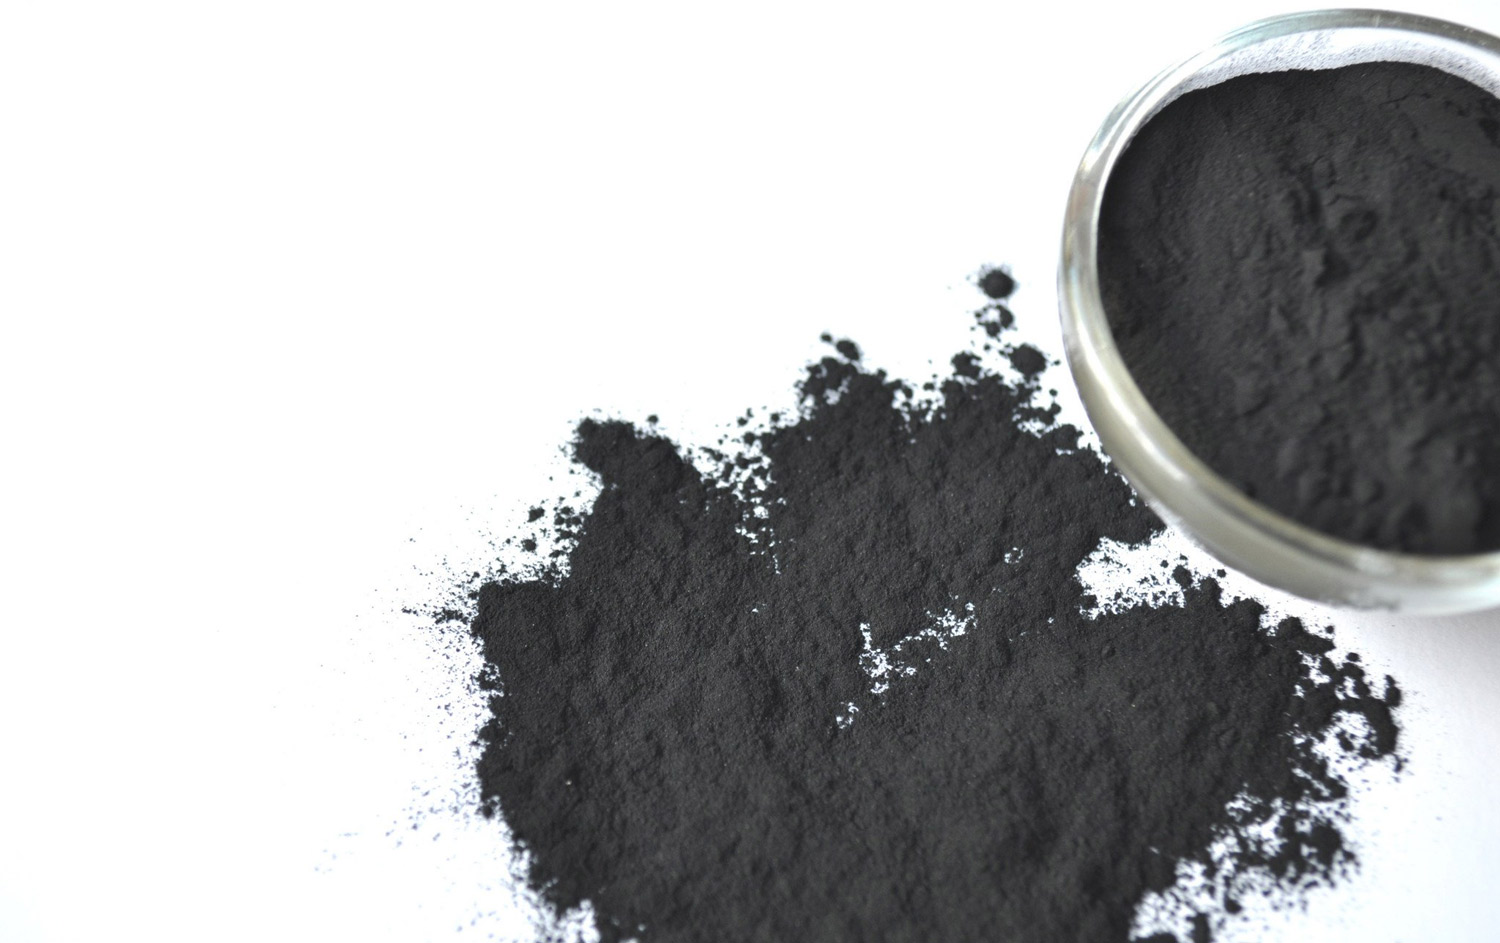 activated charcoal in a glass bowl and on a white surface